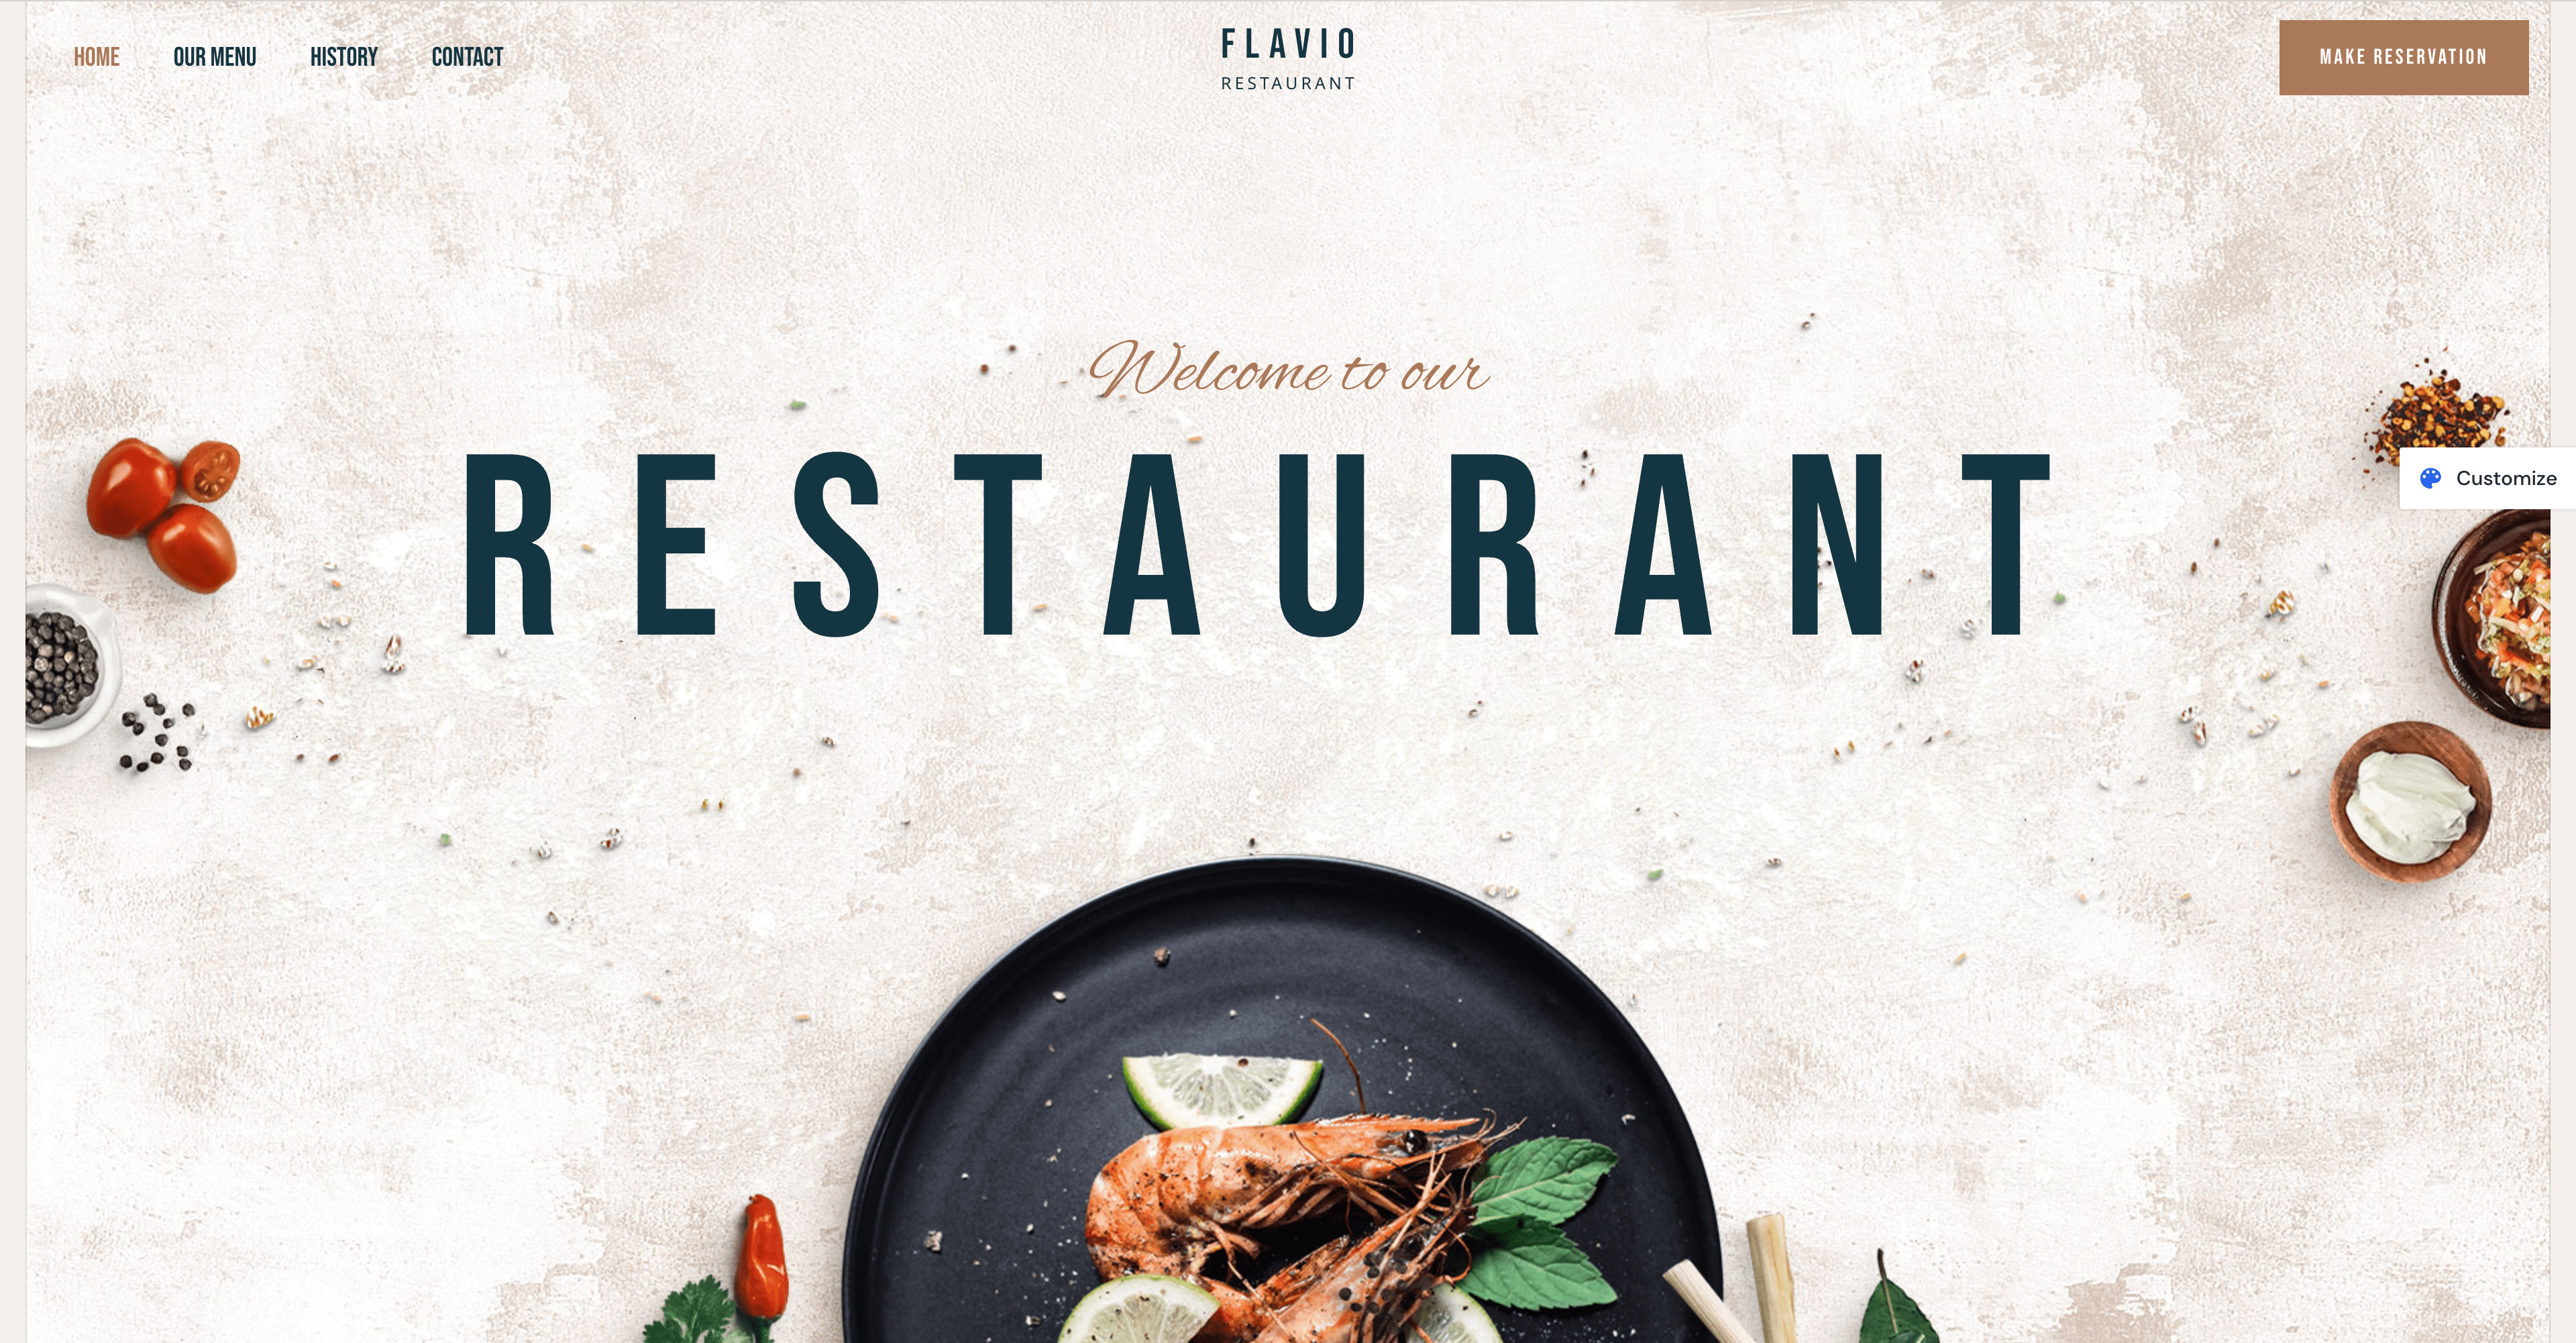 The Astra WordPress theme offers templates for restaurants.